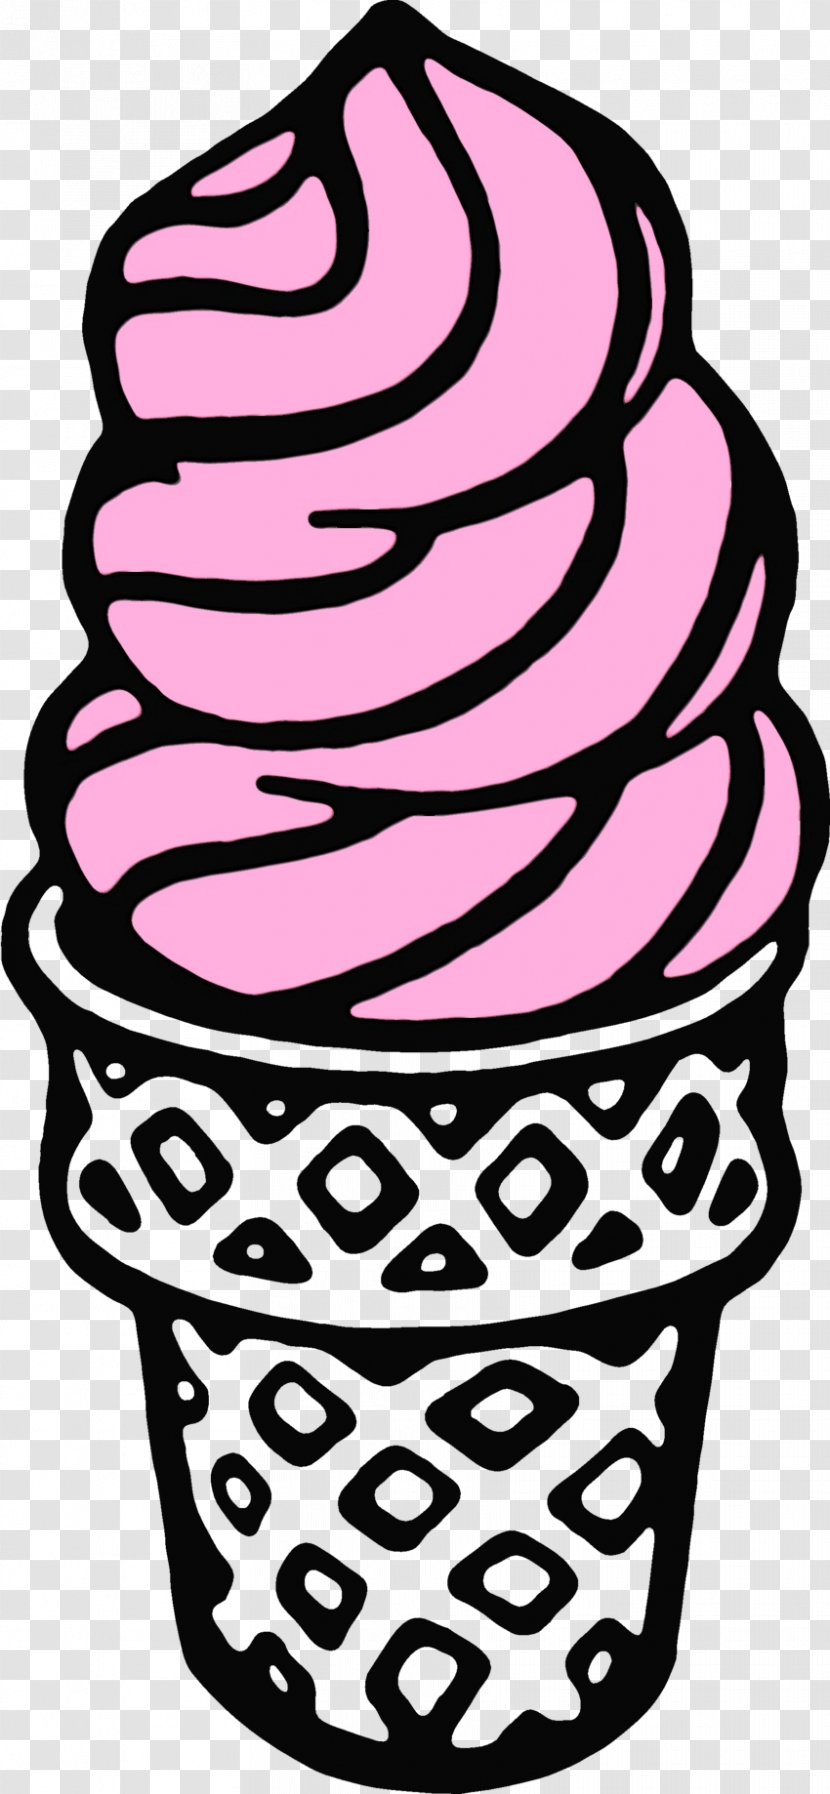 Ice Cream - Food - Baking Cup Transparent PNG